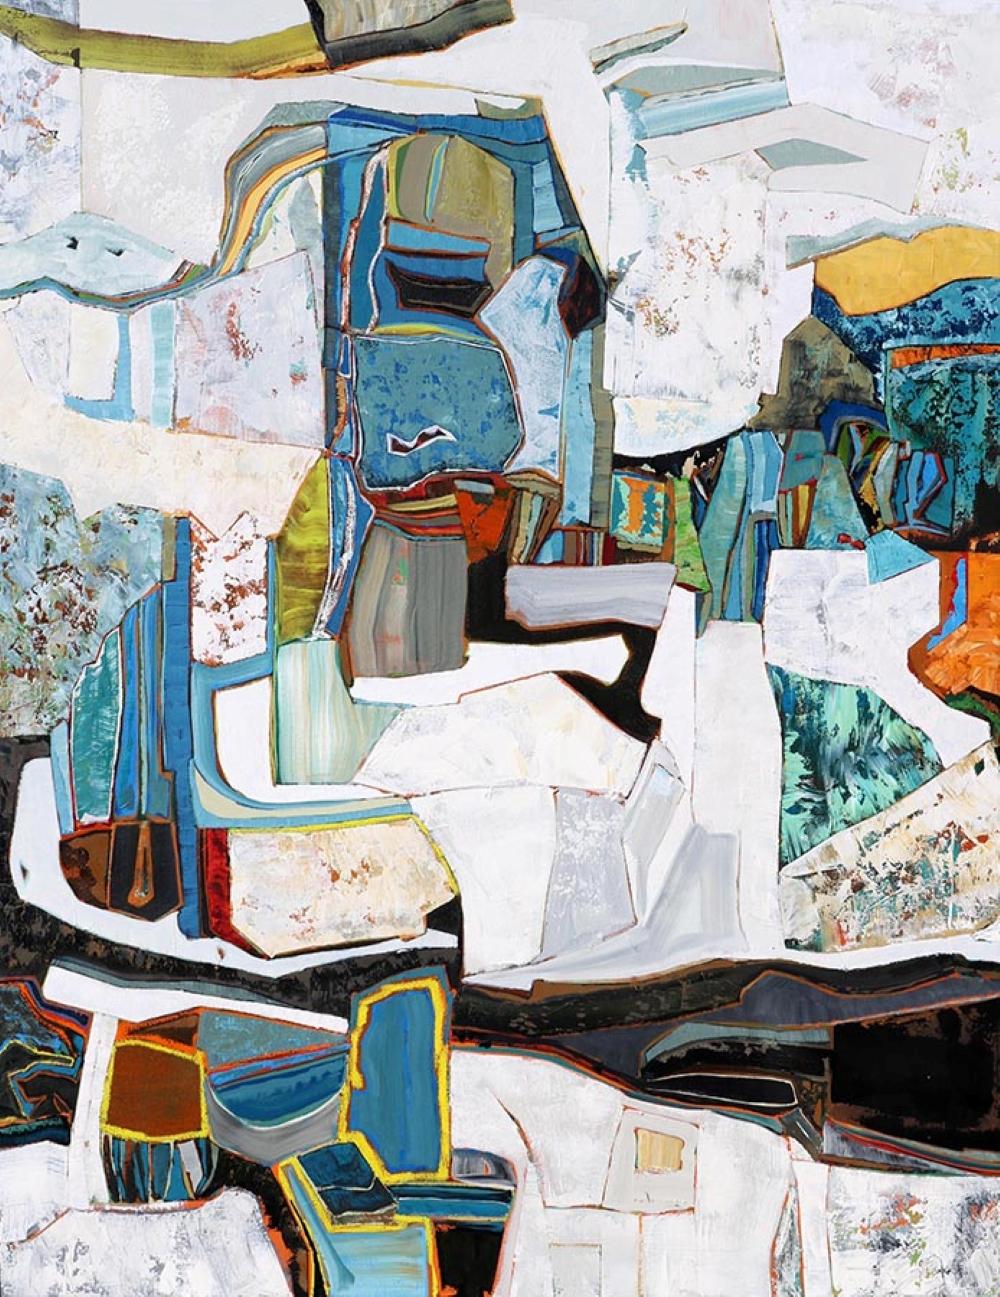 Chase Langford Abstract Painting - "Positano", a vivid horizontal view of mostly white sediment with blues underlay